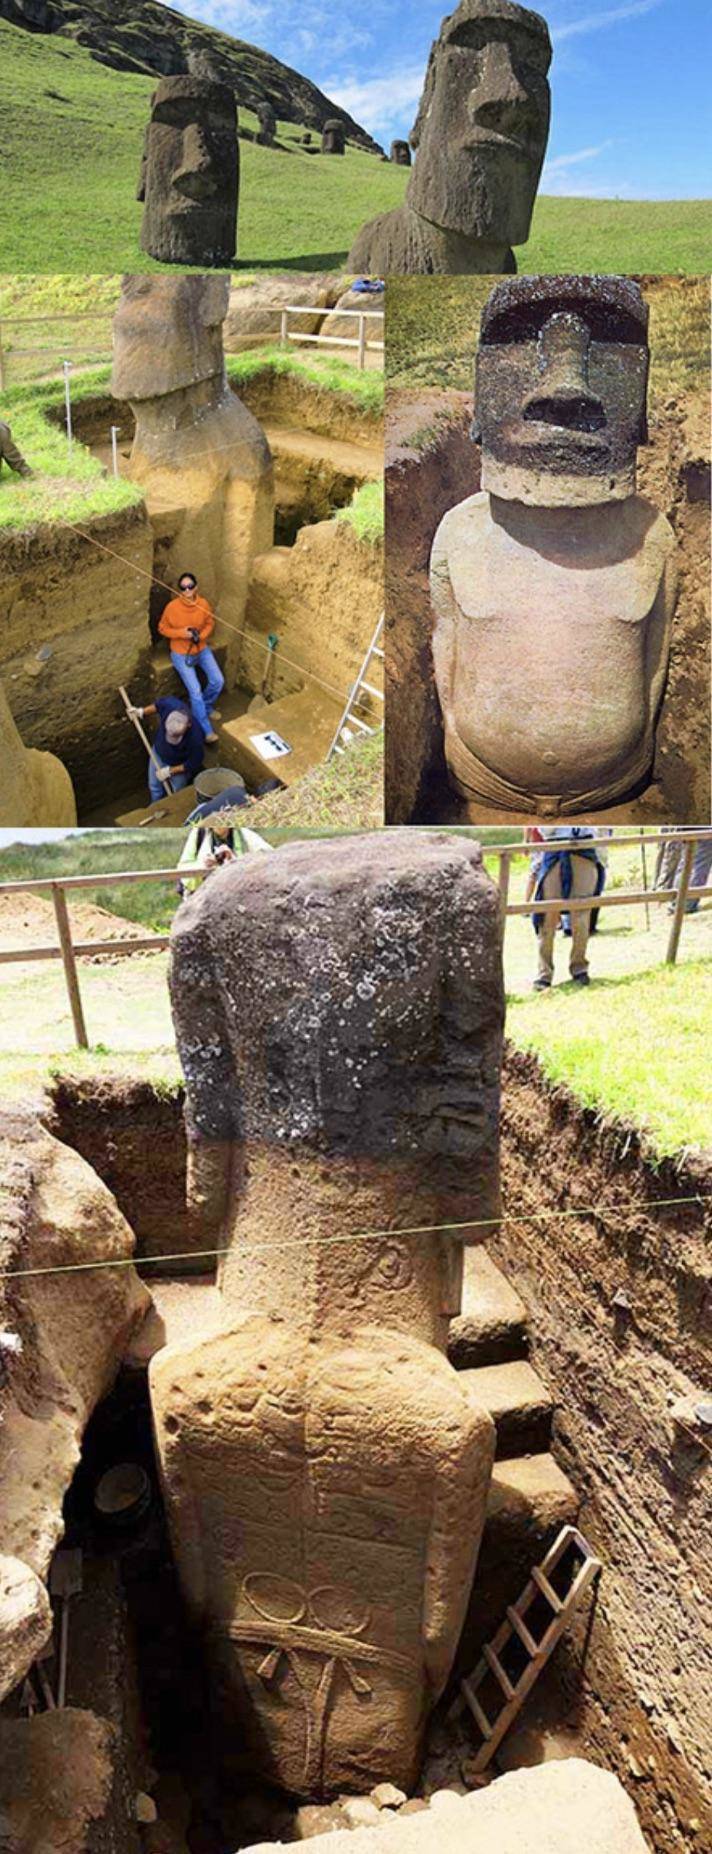 "The Easter island statues have bodies